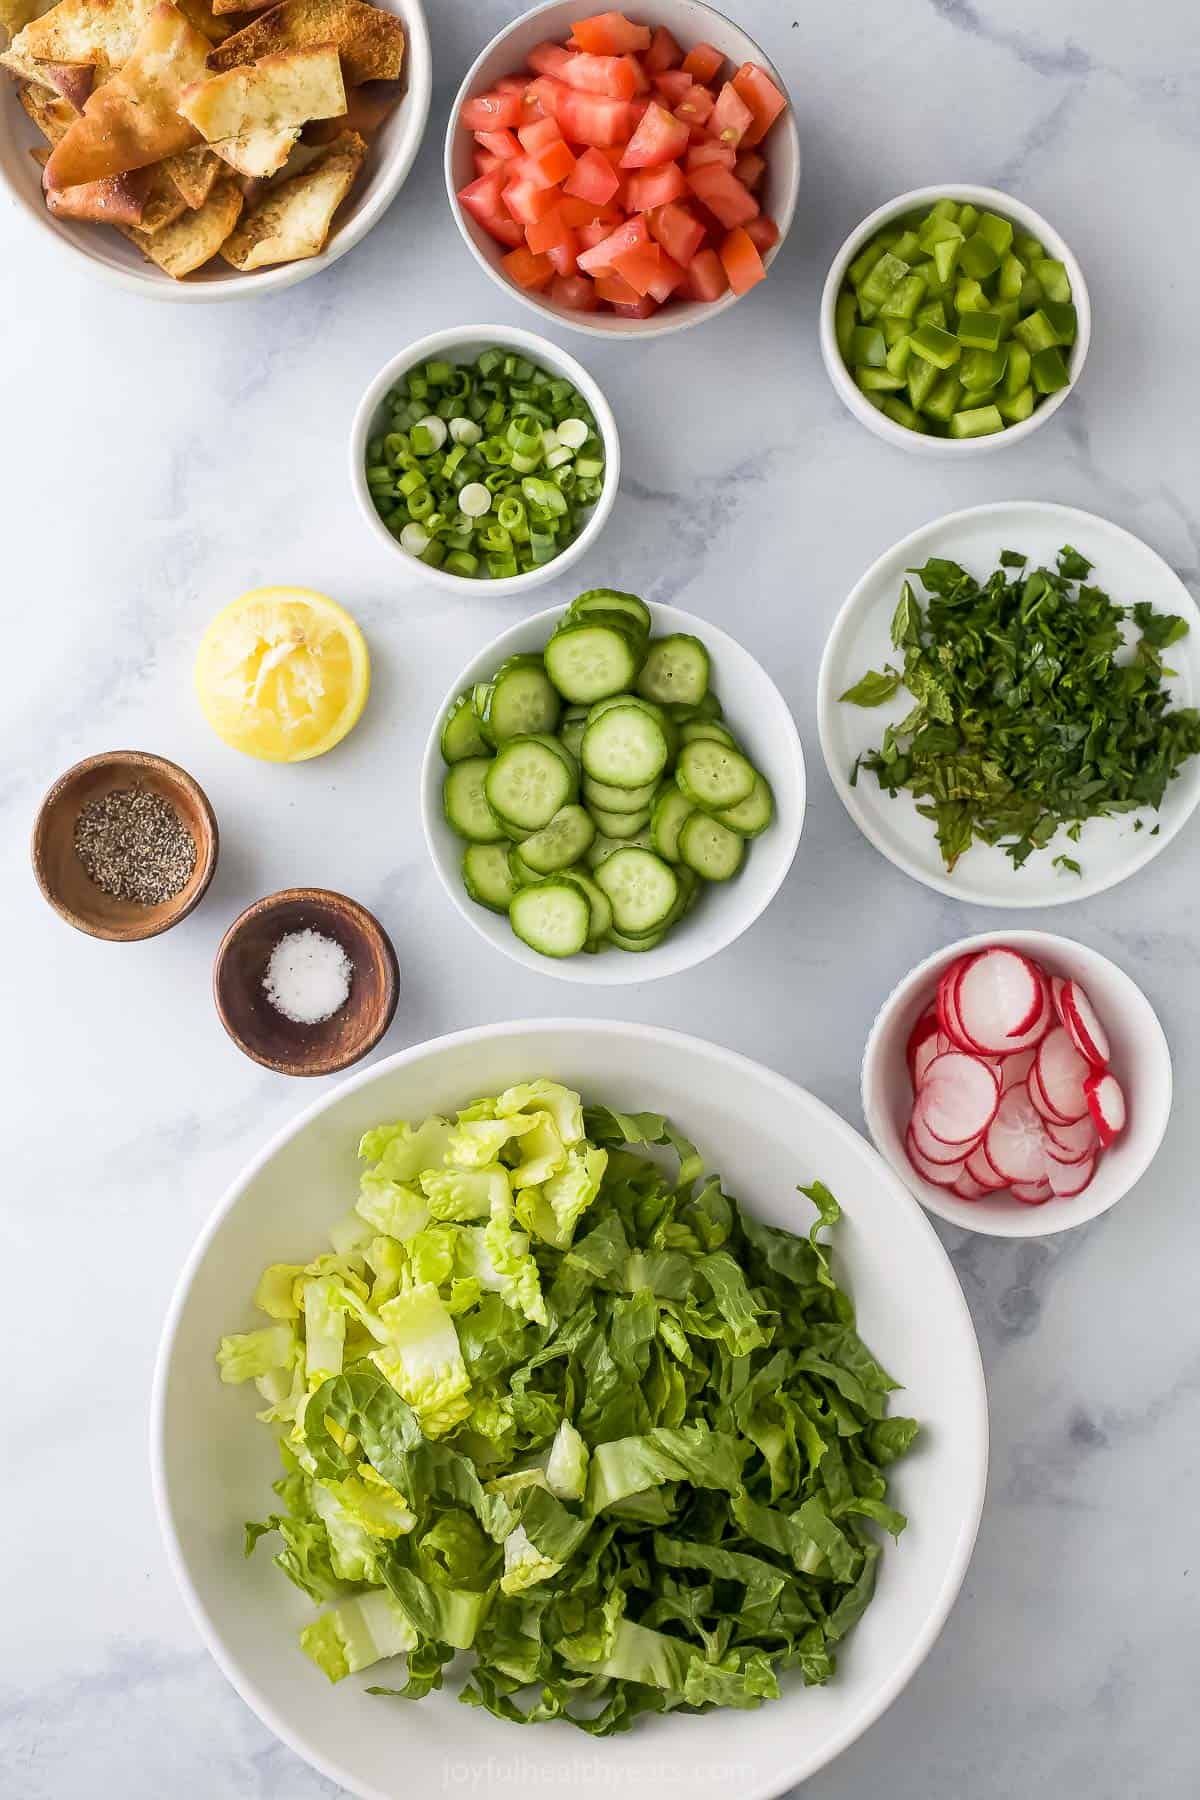 Lettuce, radishes, salt, pepper and the rest of the ingredients laid out on a marble surface